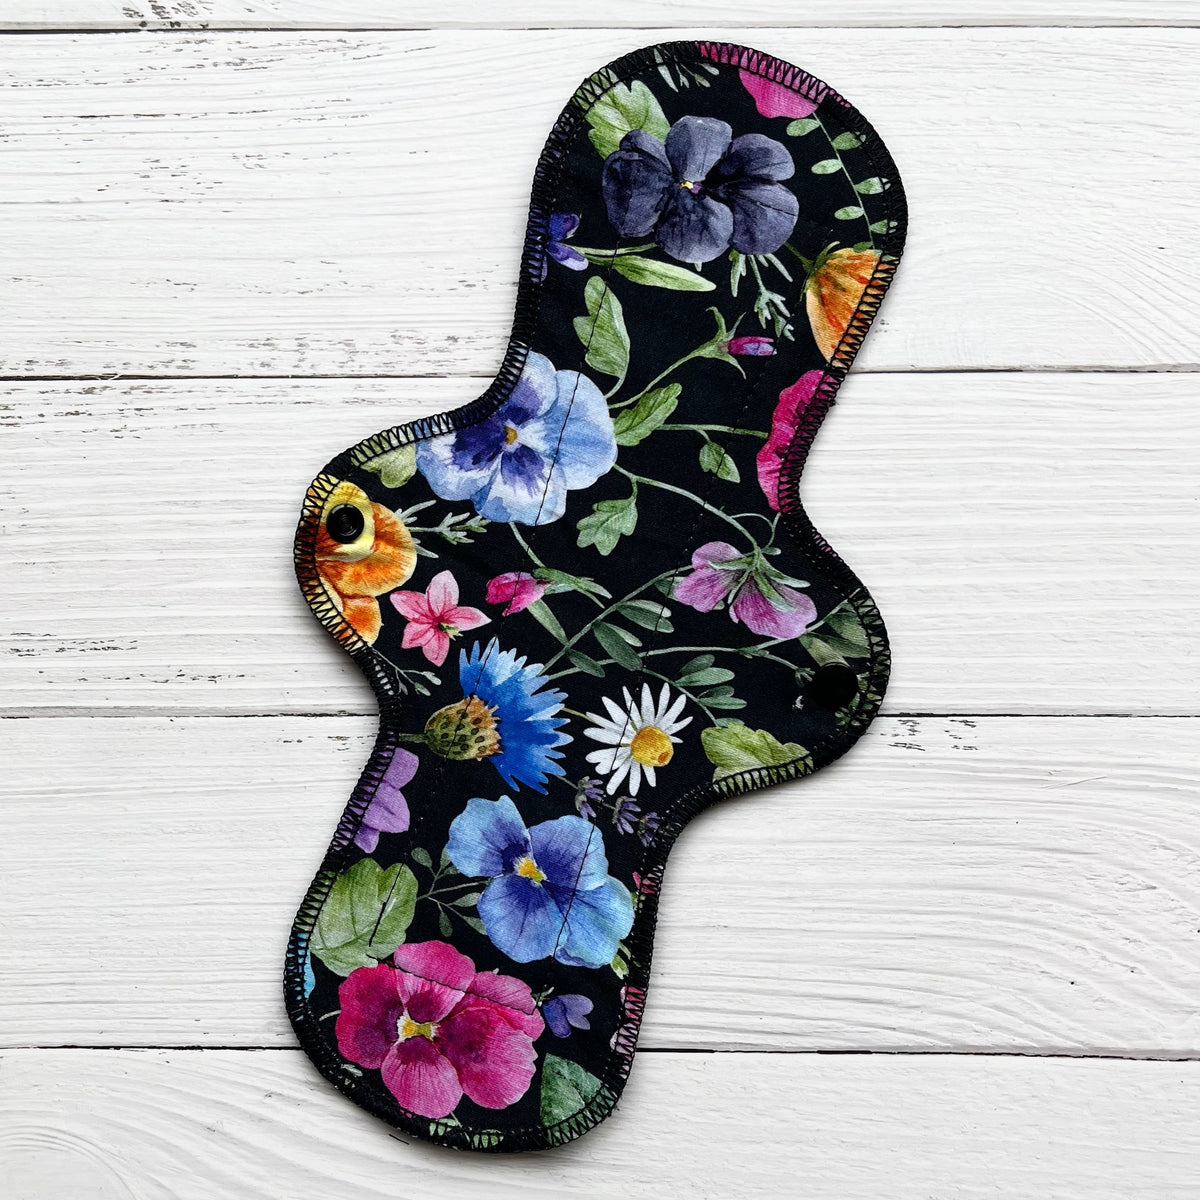 12 inch long reusable pad with a bold pansy on black print on a rustic wood background